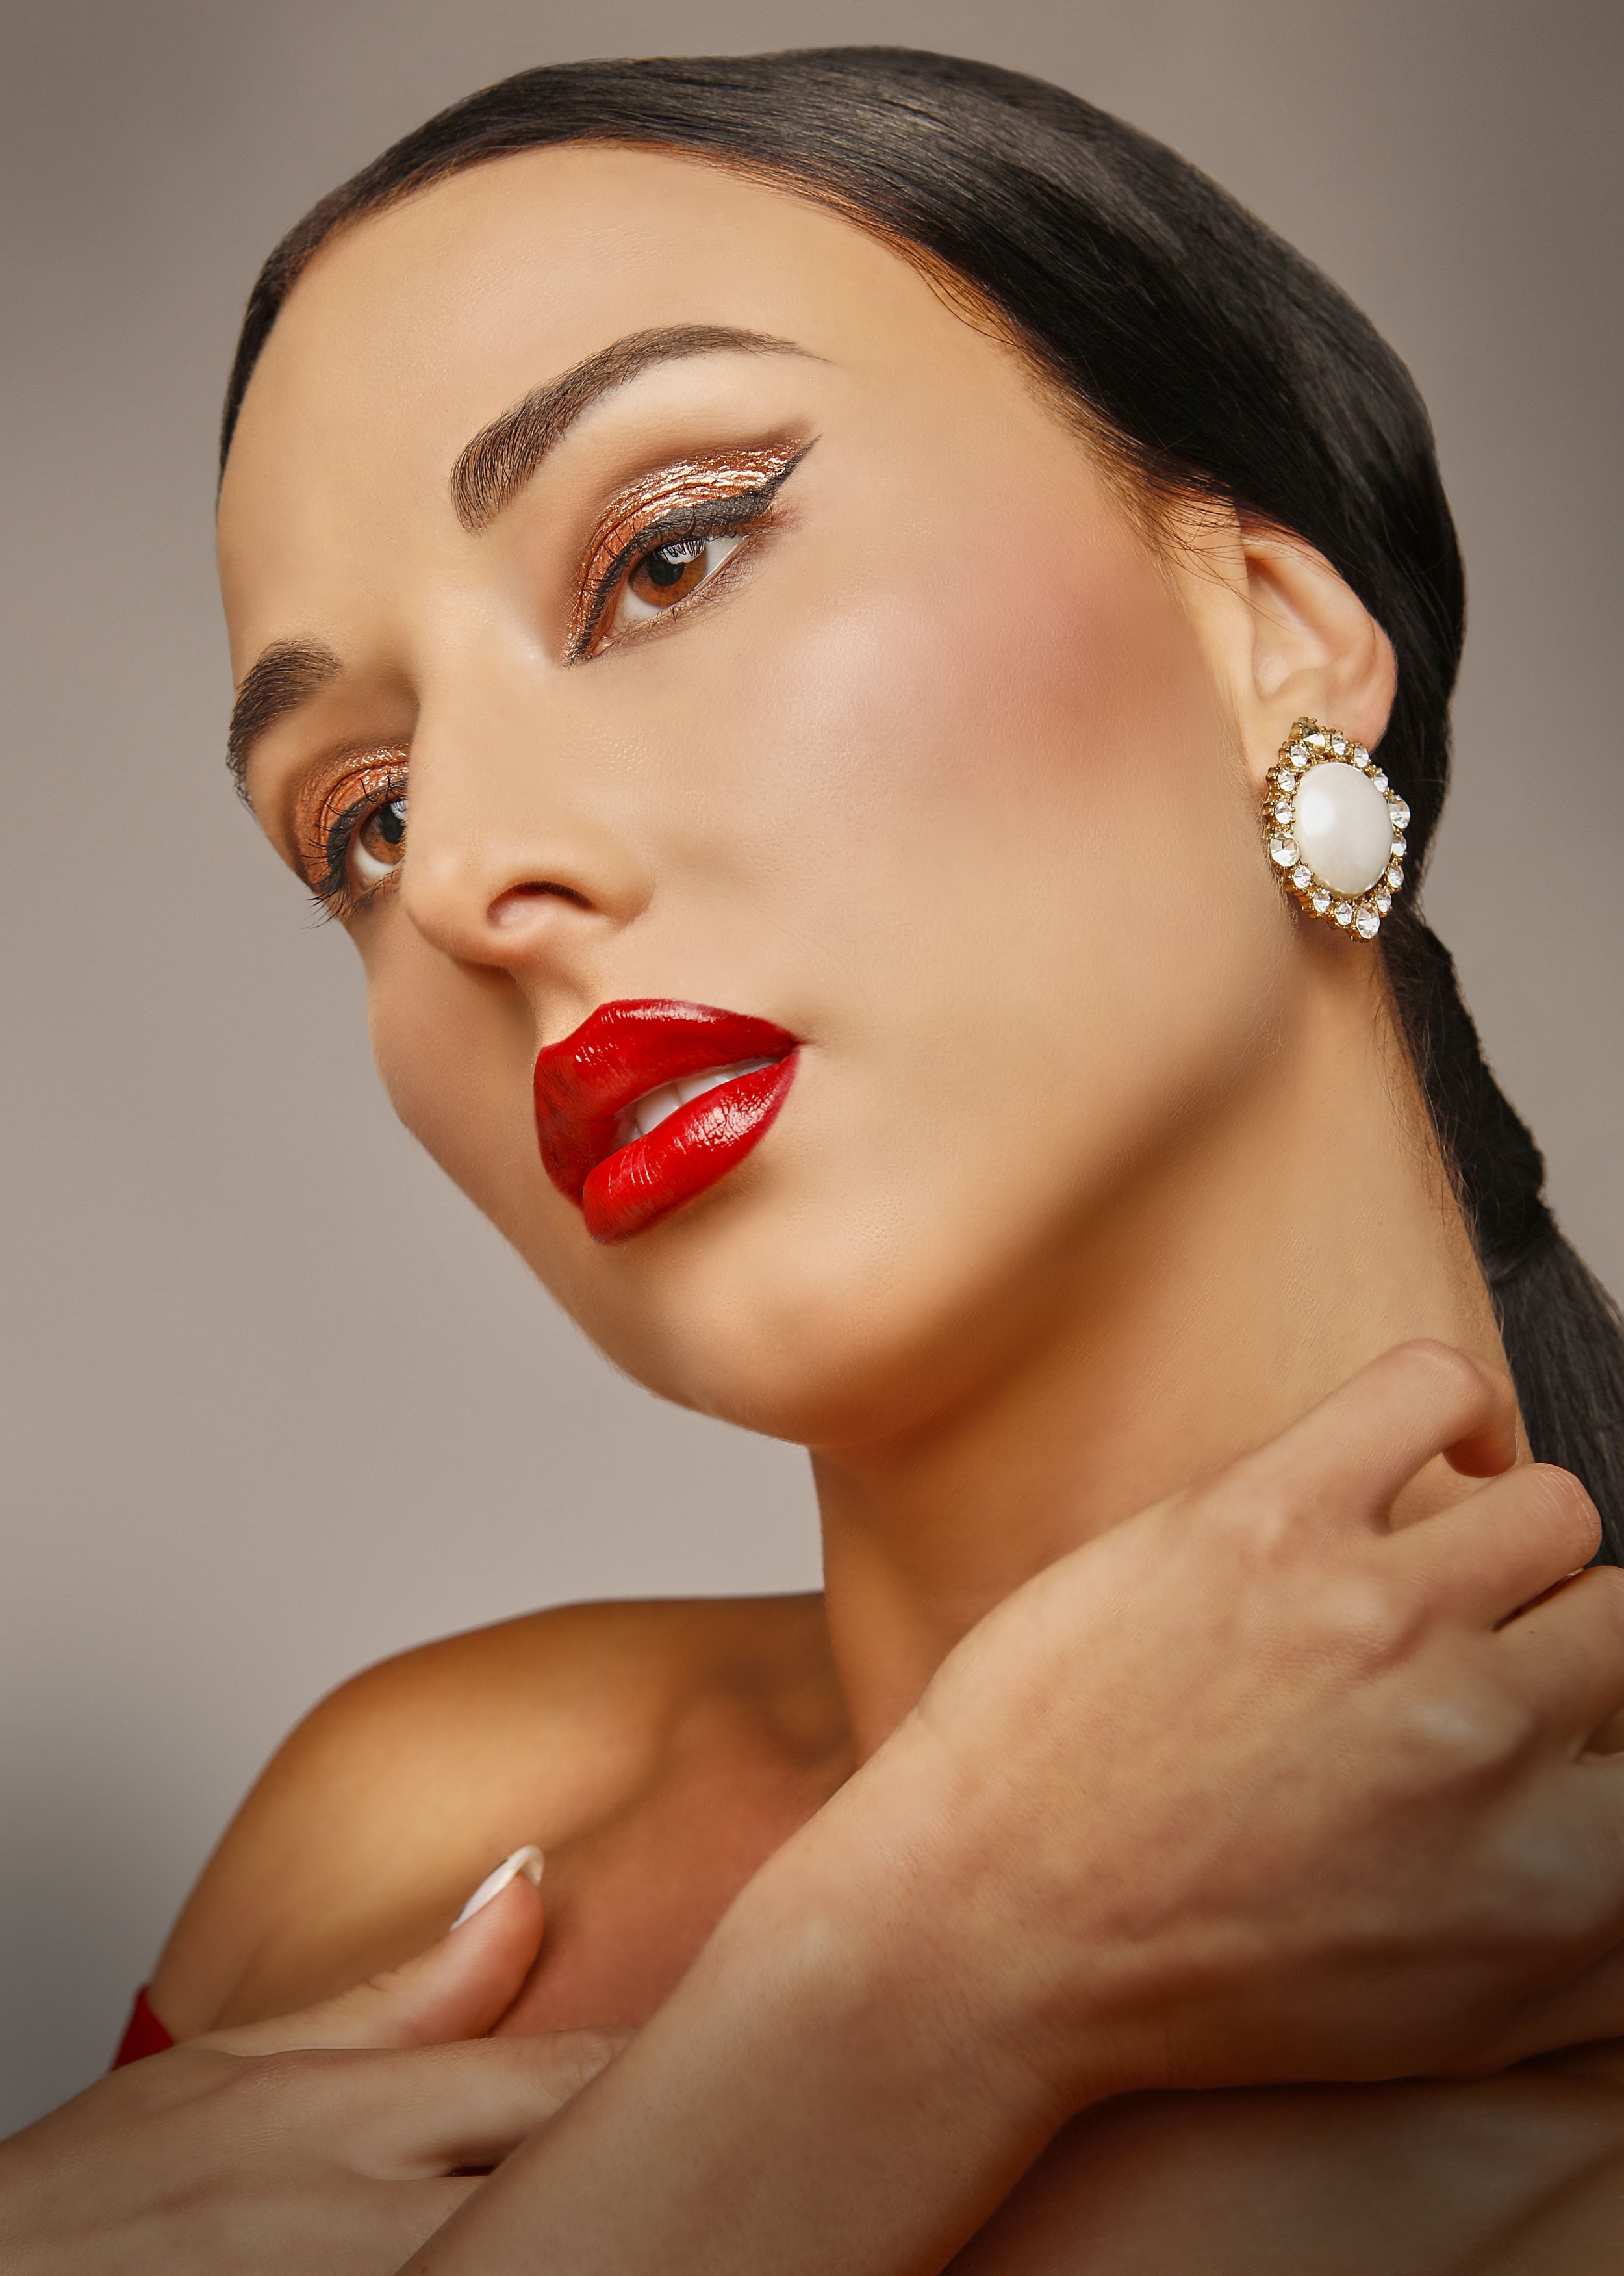 Model Portrait With Red Lips_47A3045_SM.jpg